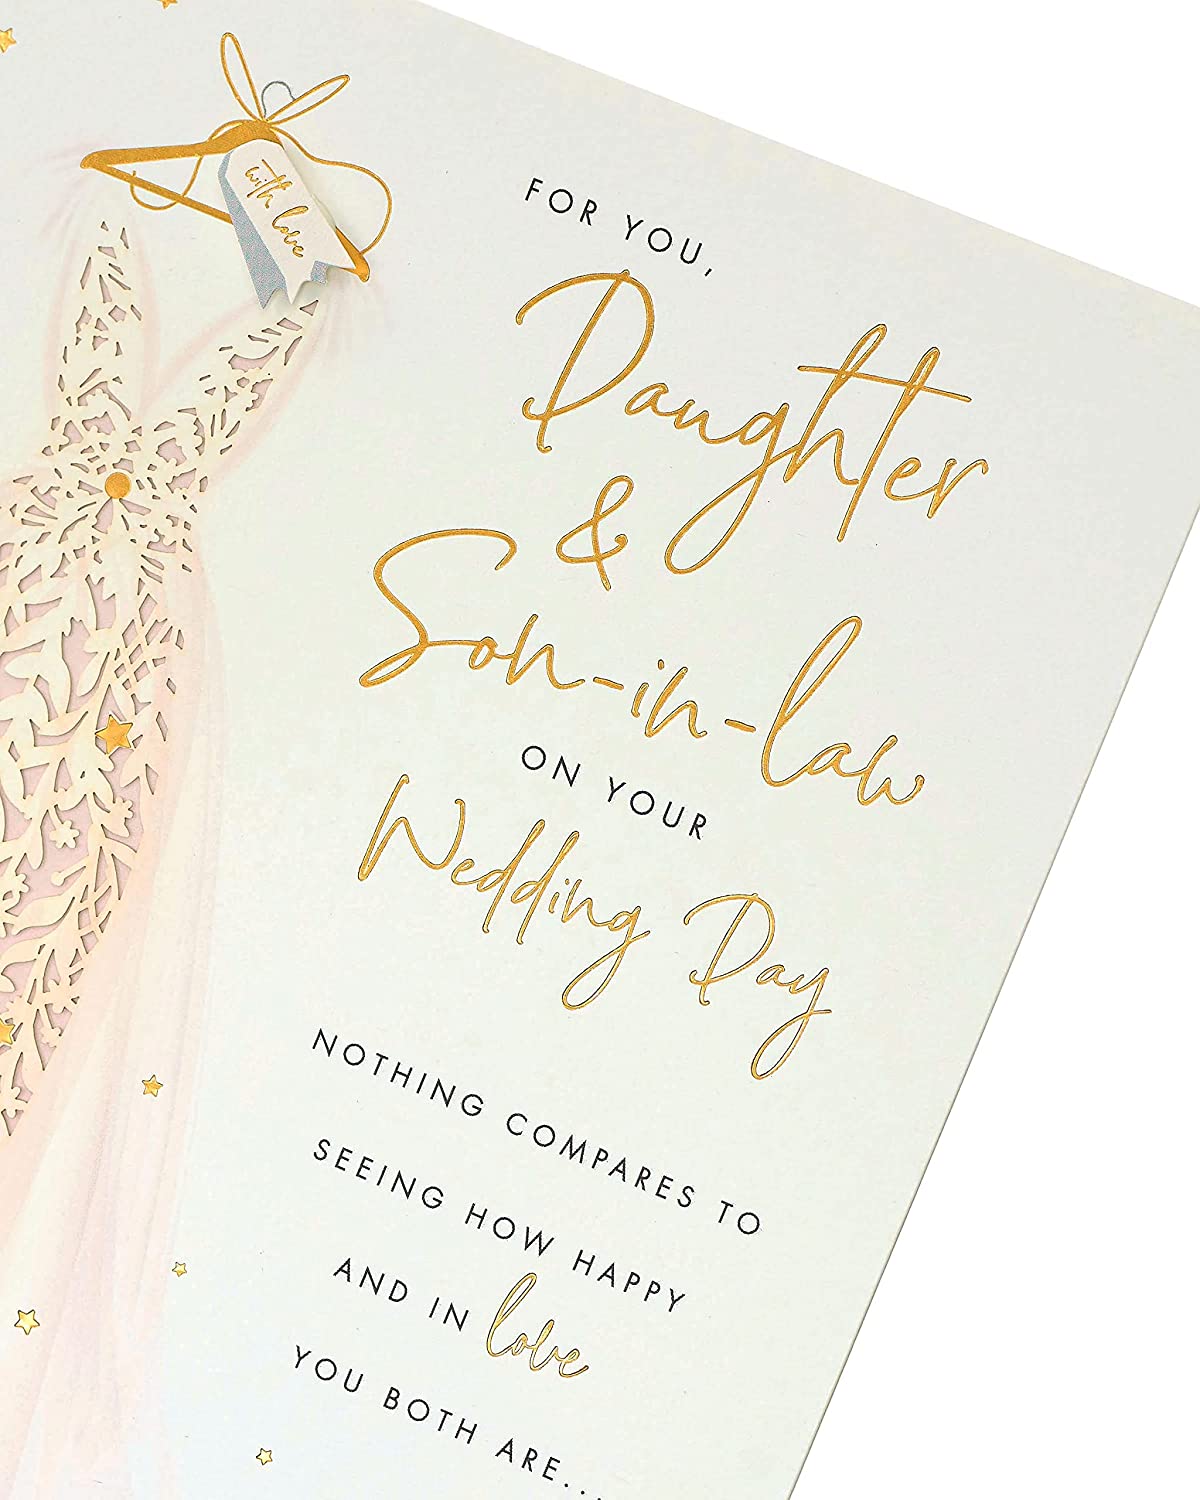 Wedding Day Congratulations Card for Daughter & Son in Law with Sentimental Message